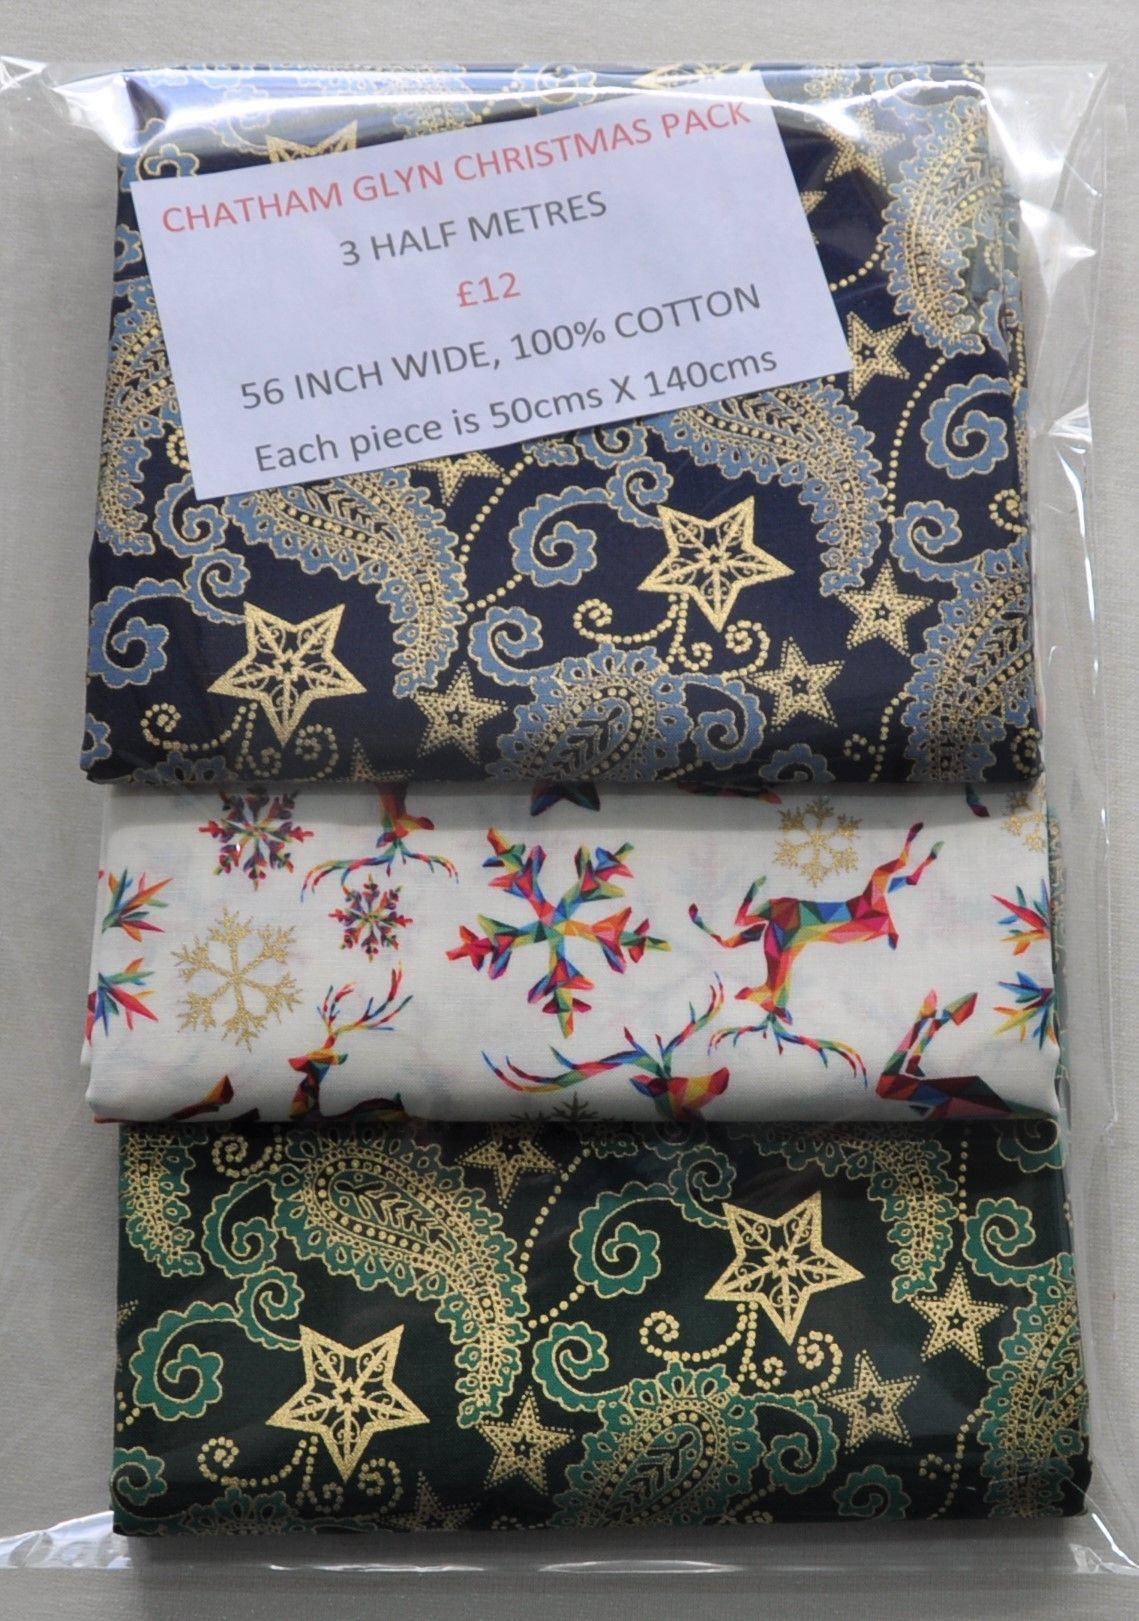 3 half metre pack by Chatham Glyn. 100% cotton. Christmas pack 3.